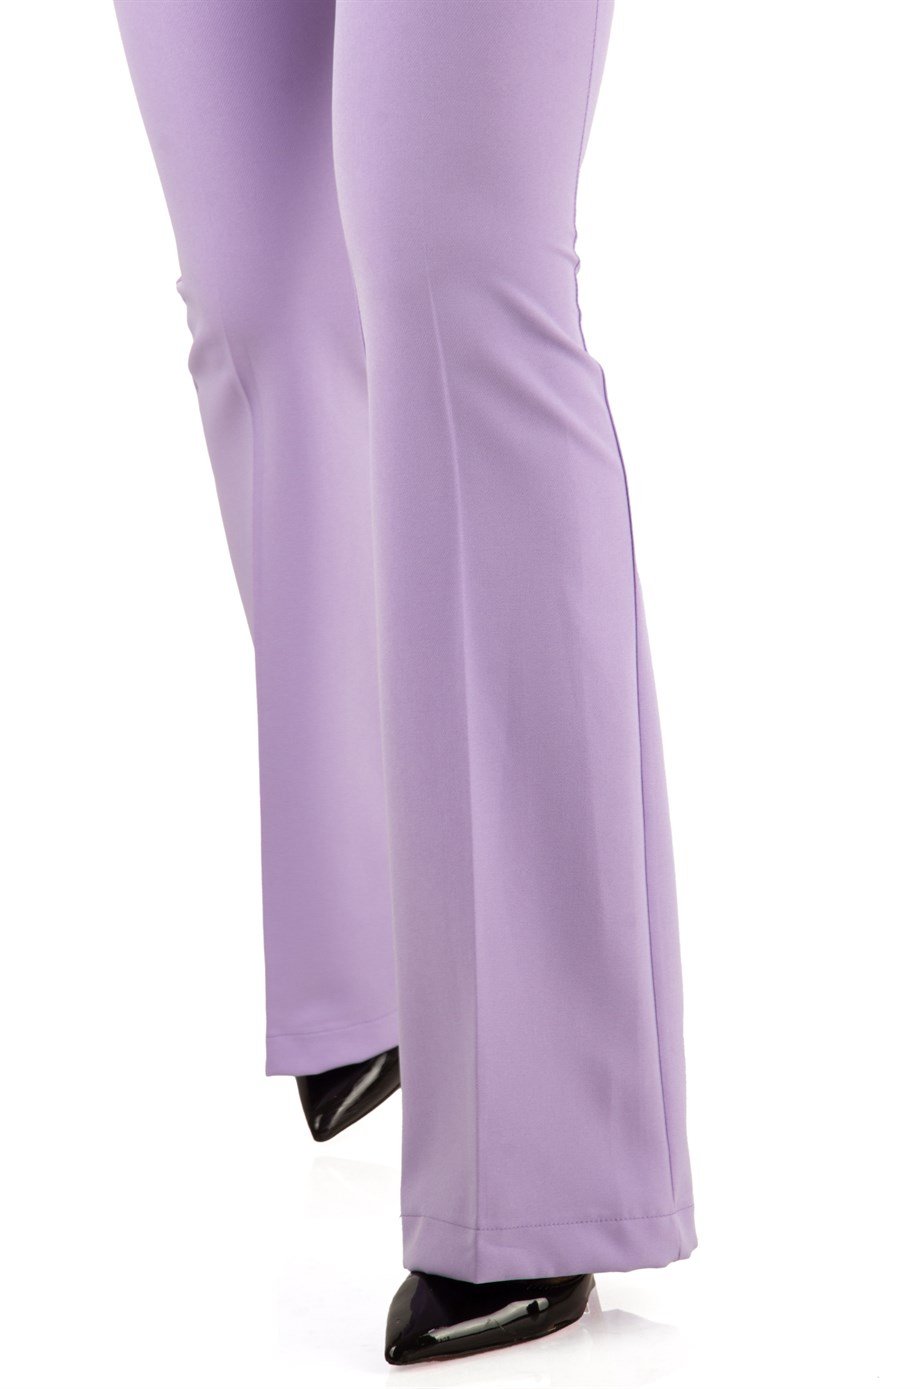 Classic Trouser Office Pant - Lilac - Wholesale Womens Clothing